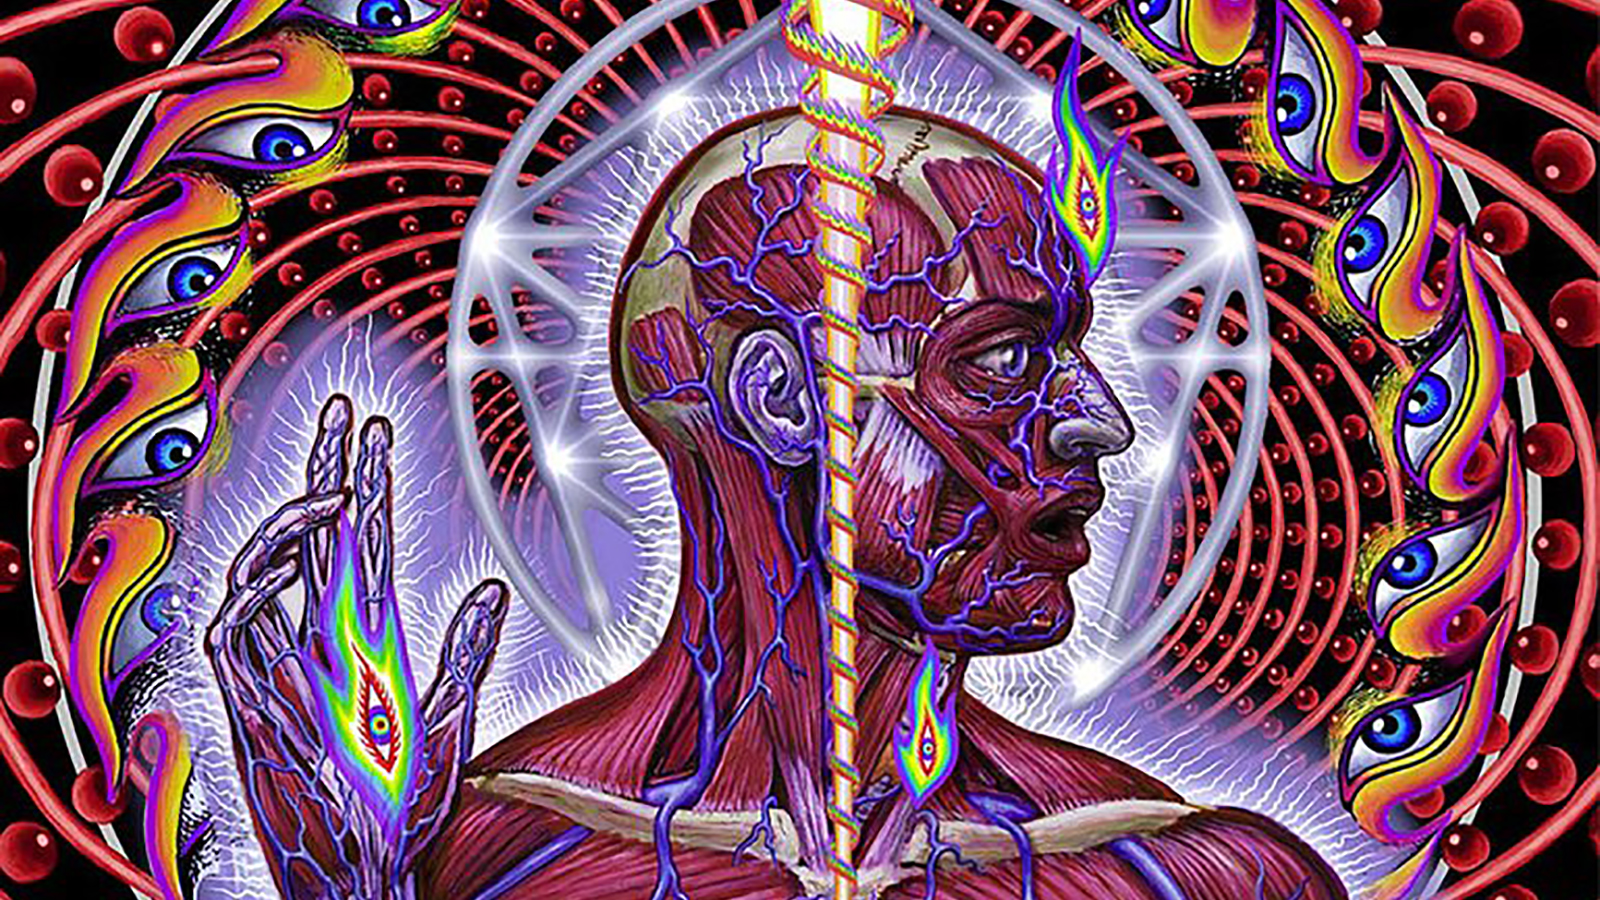 Tool Lateralus